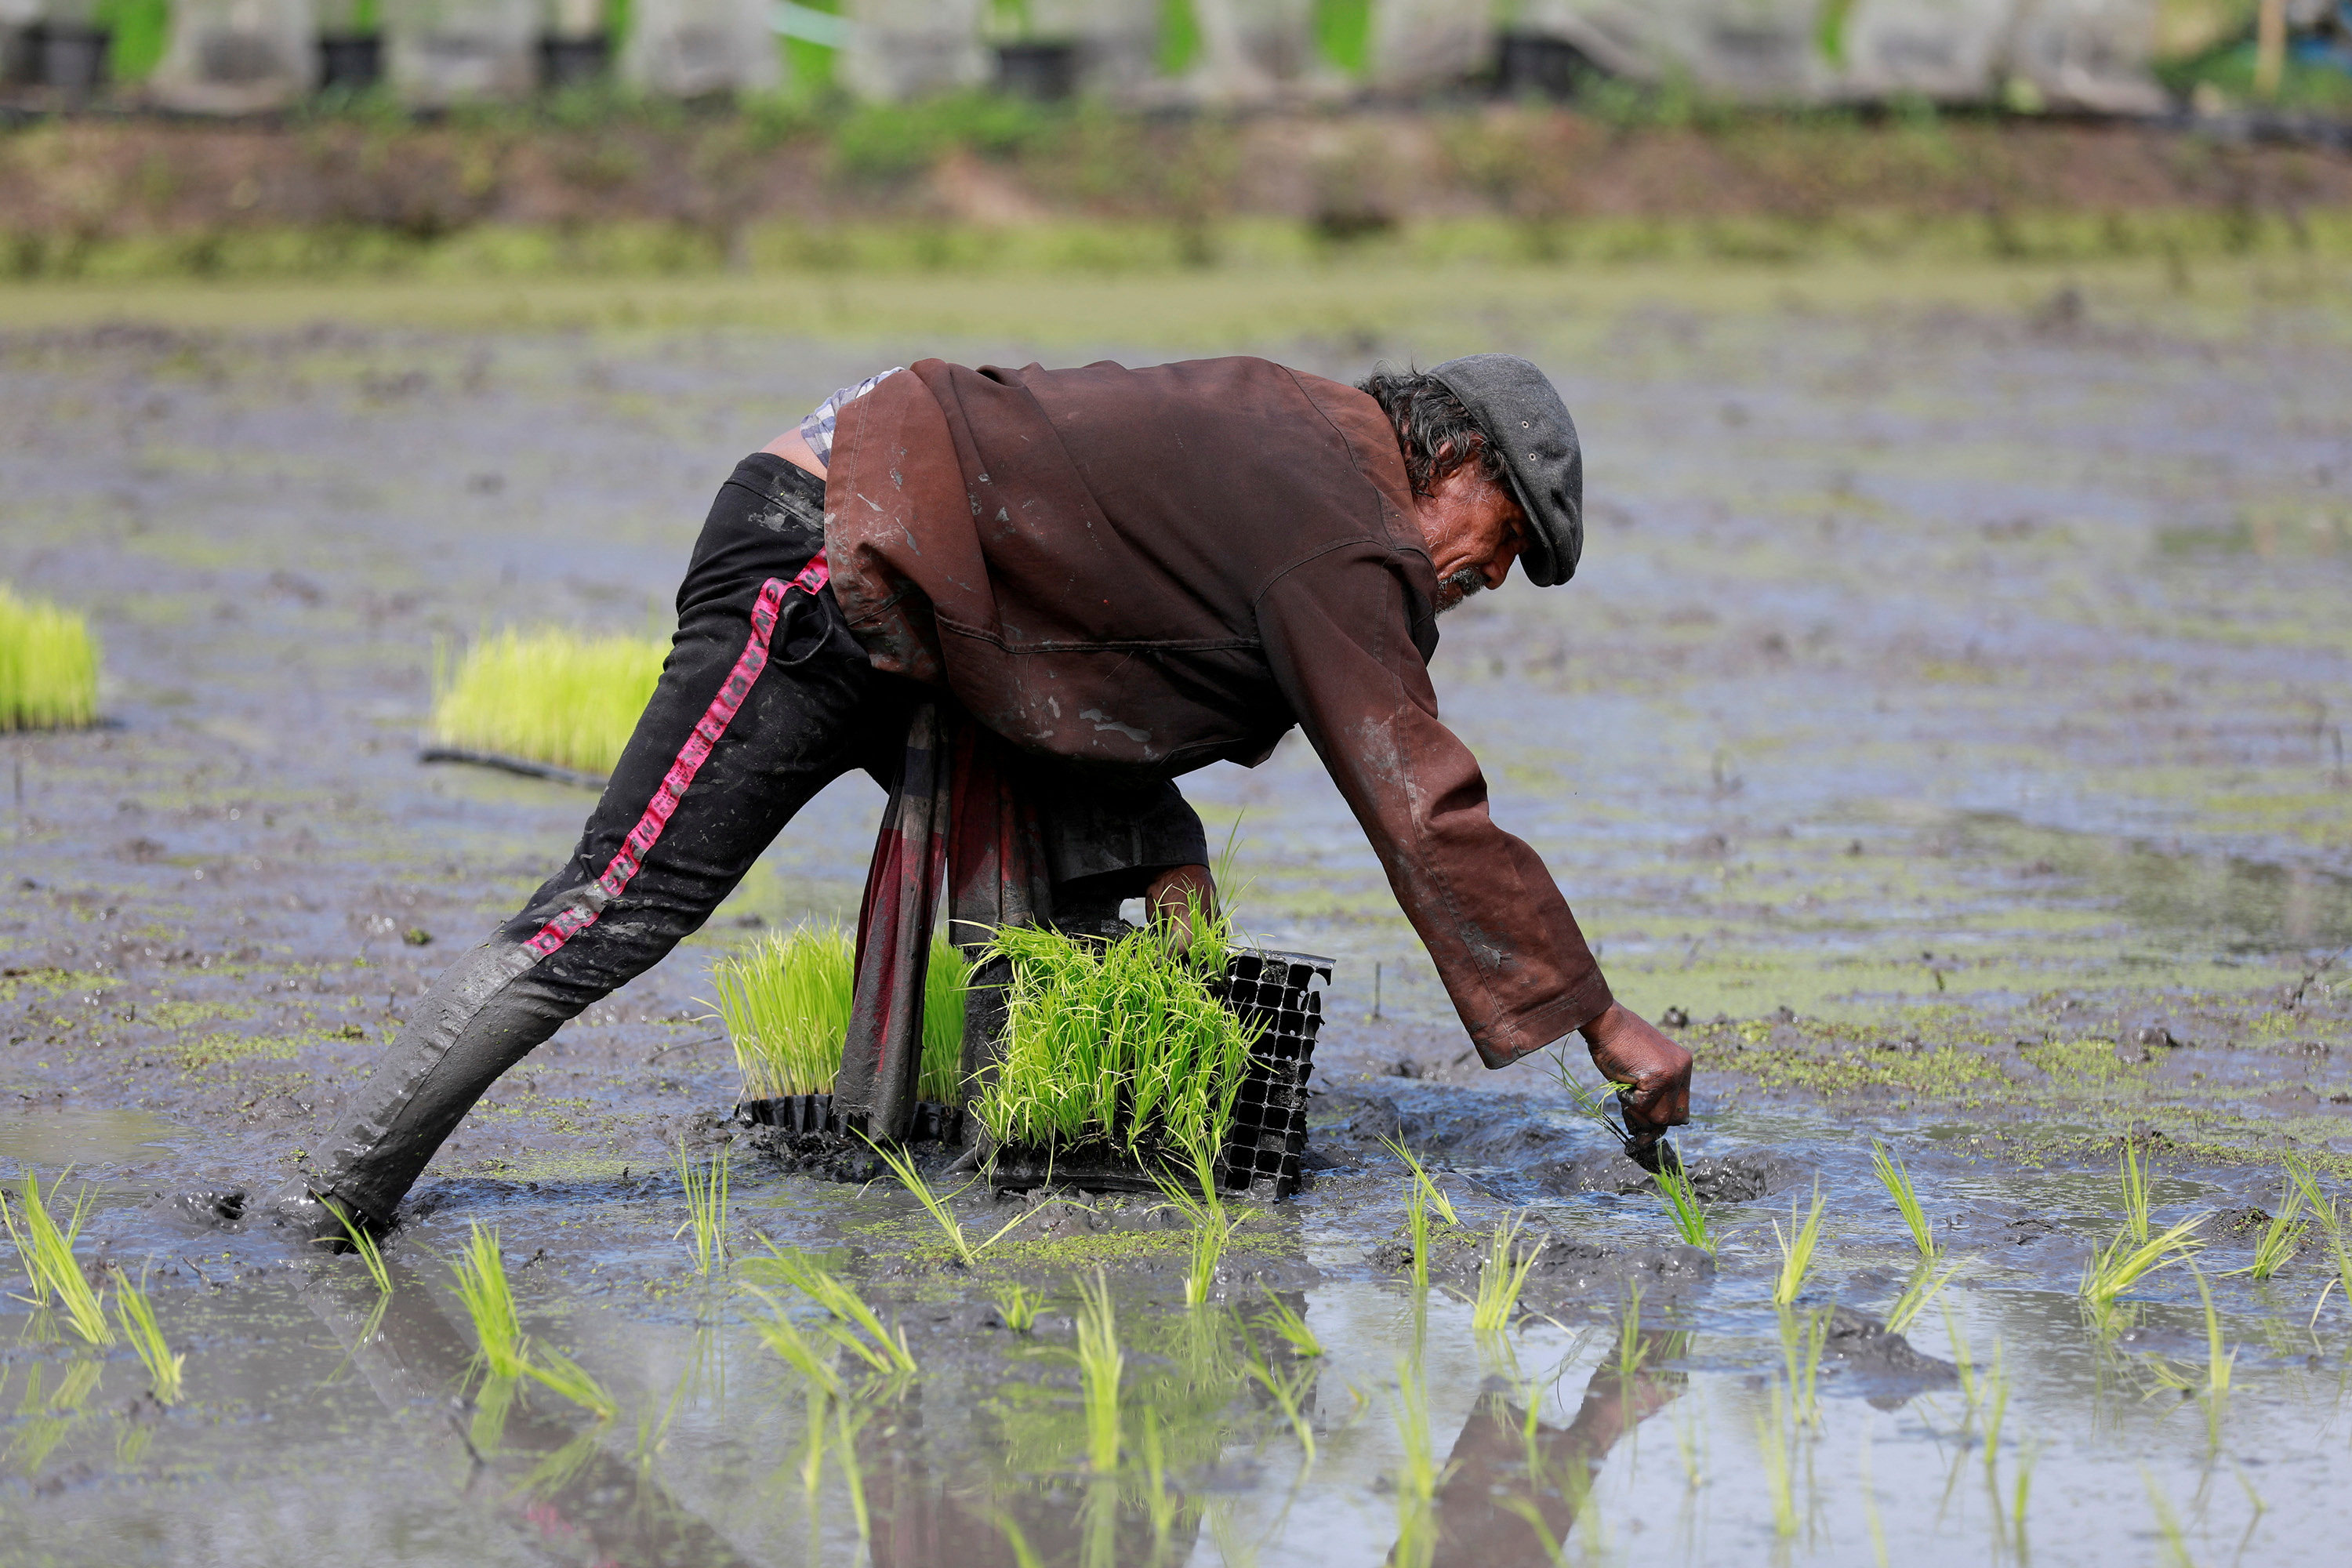 A worker cultivates rice plants on a farm in Bangkok, Thailand, in August 2018. Extreme weather events such as heatwaves and floods can wreak havoc on agricultural production. Photo: Reuters 